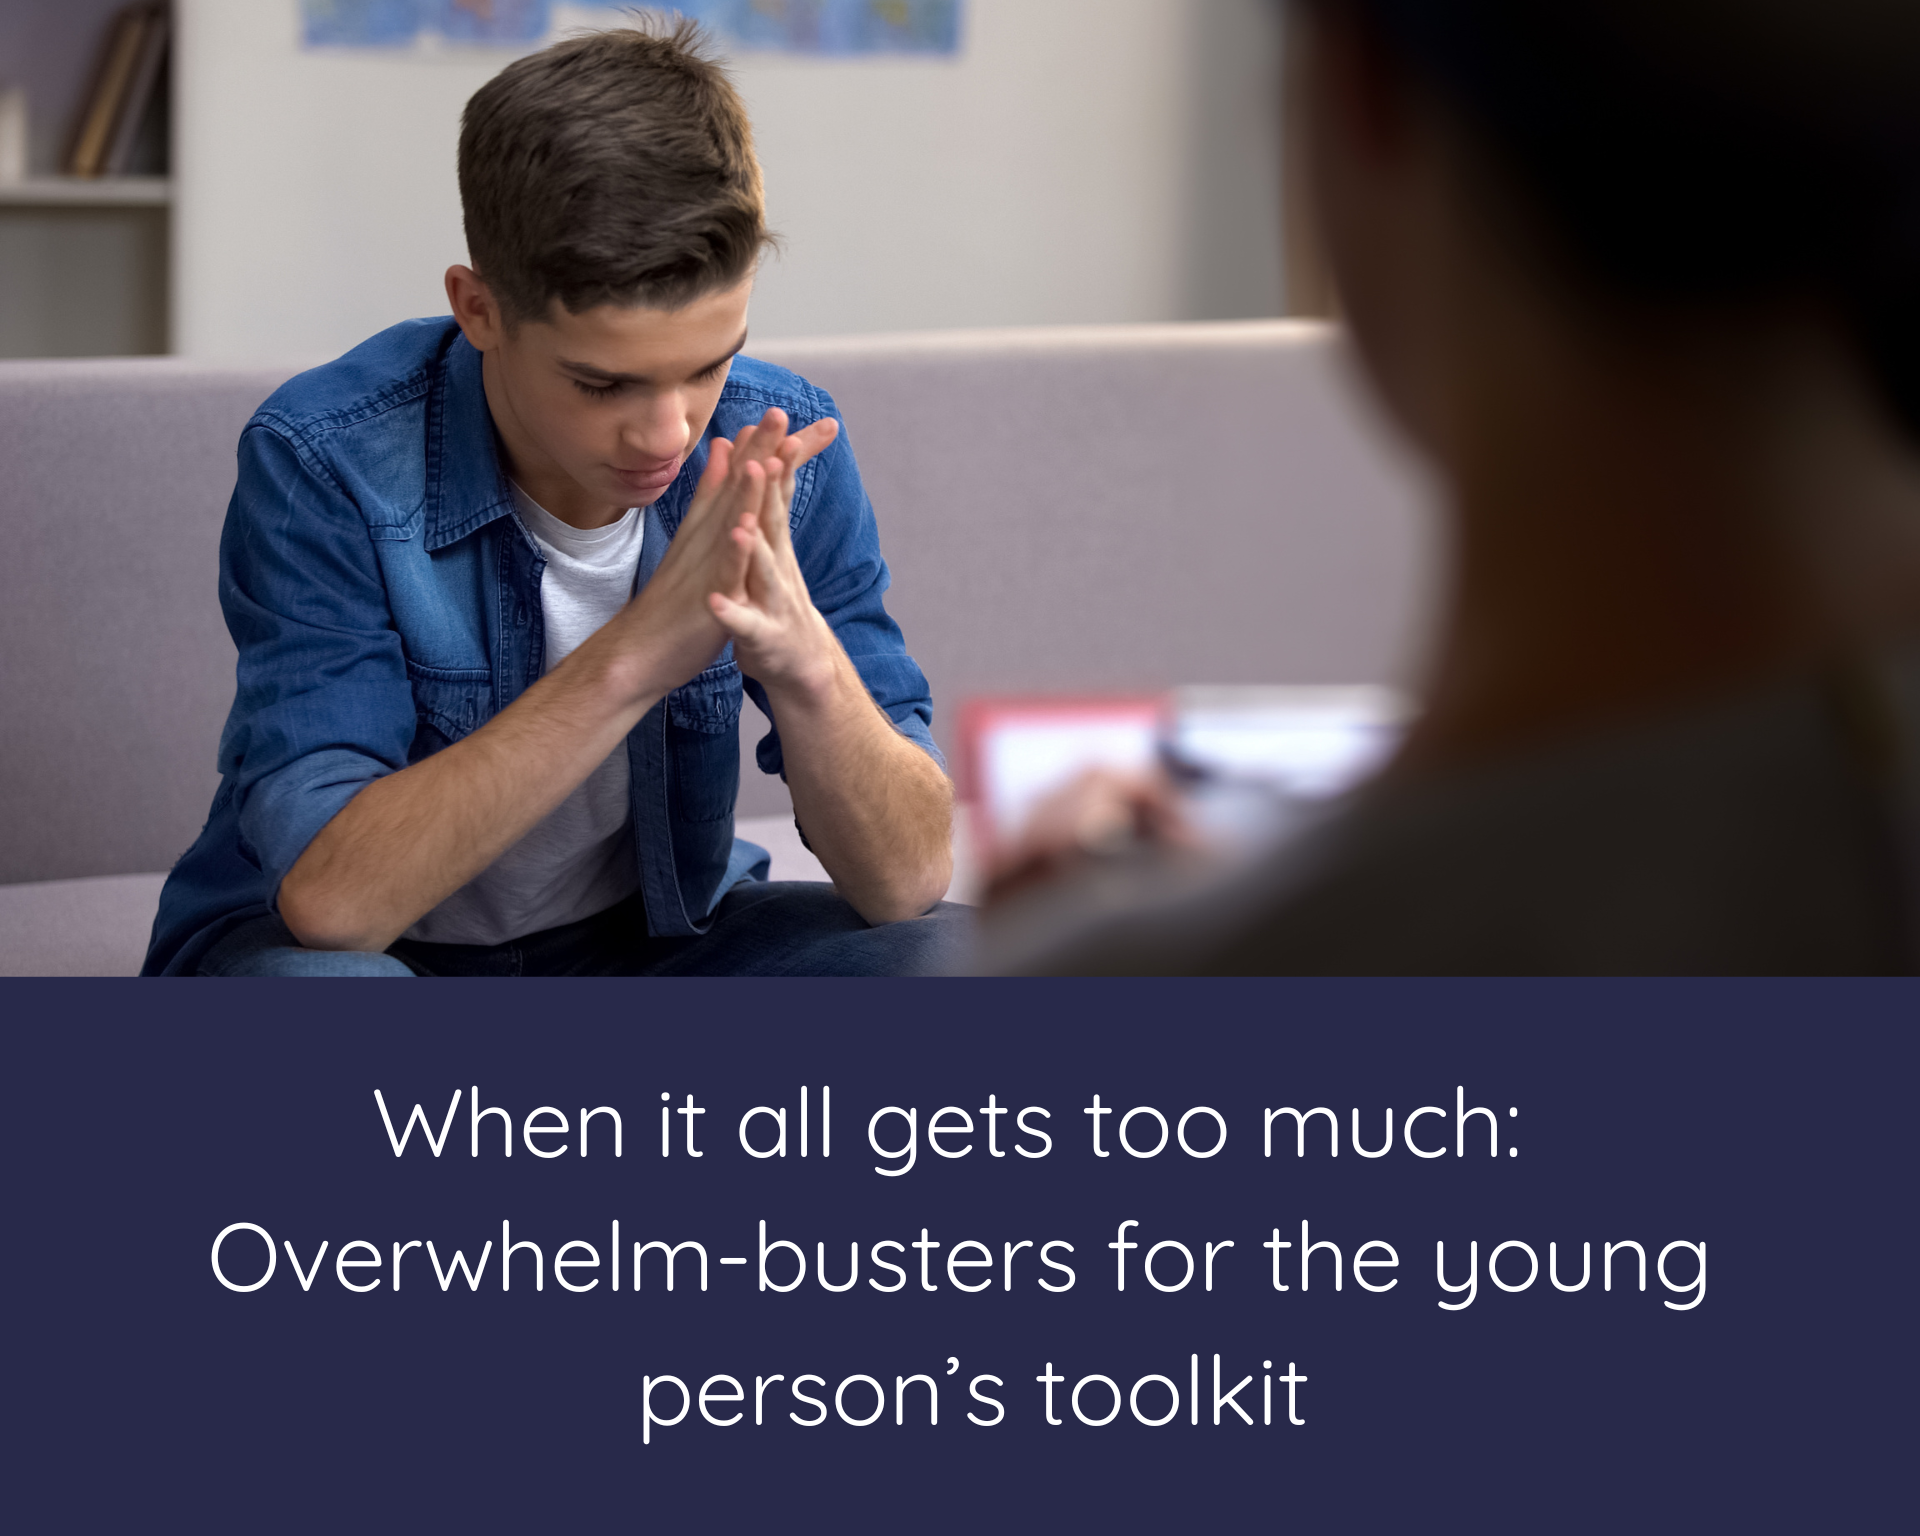 When it all gets too much: overwhelm-busters for the young person’s toolkit